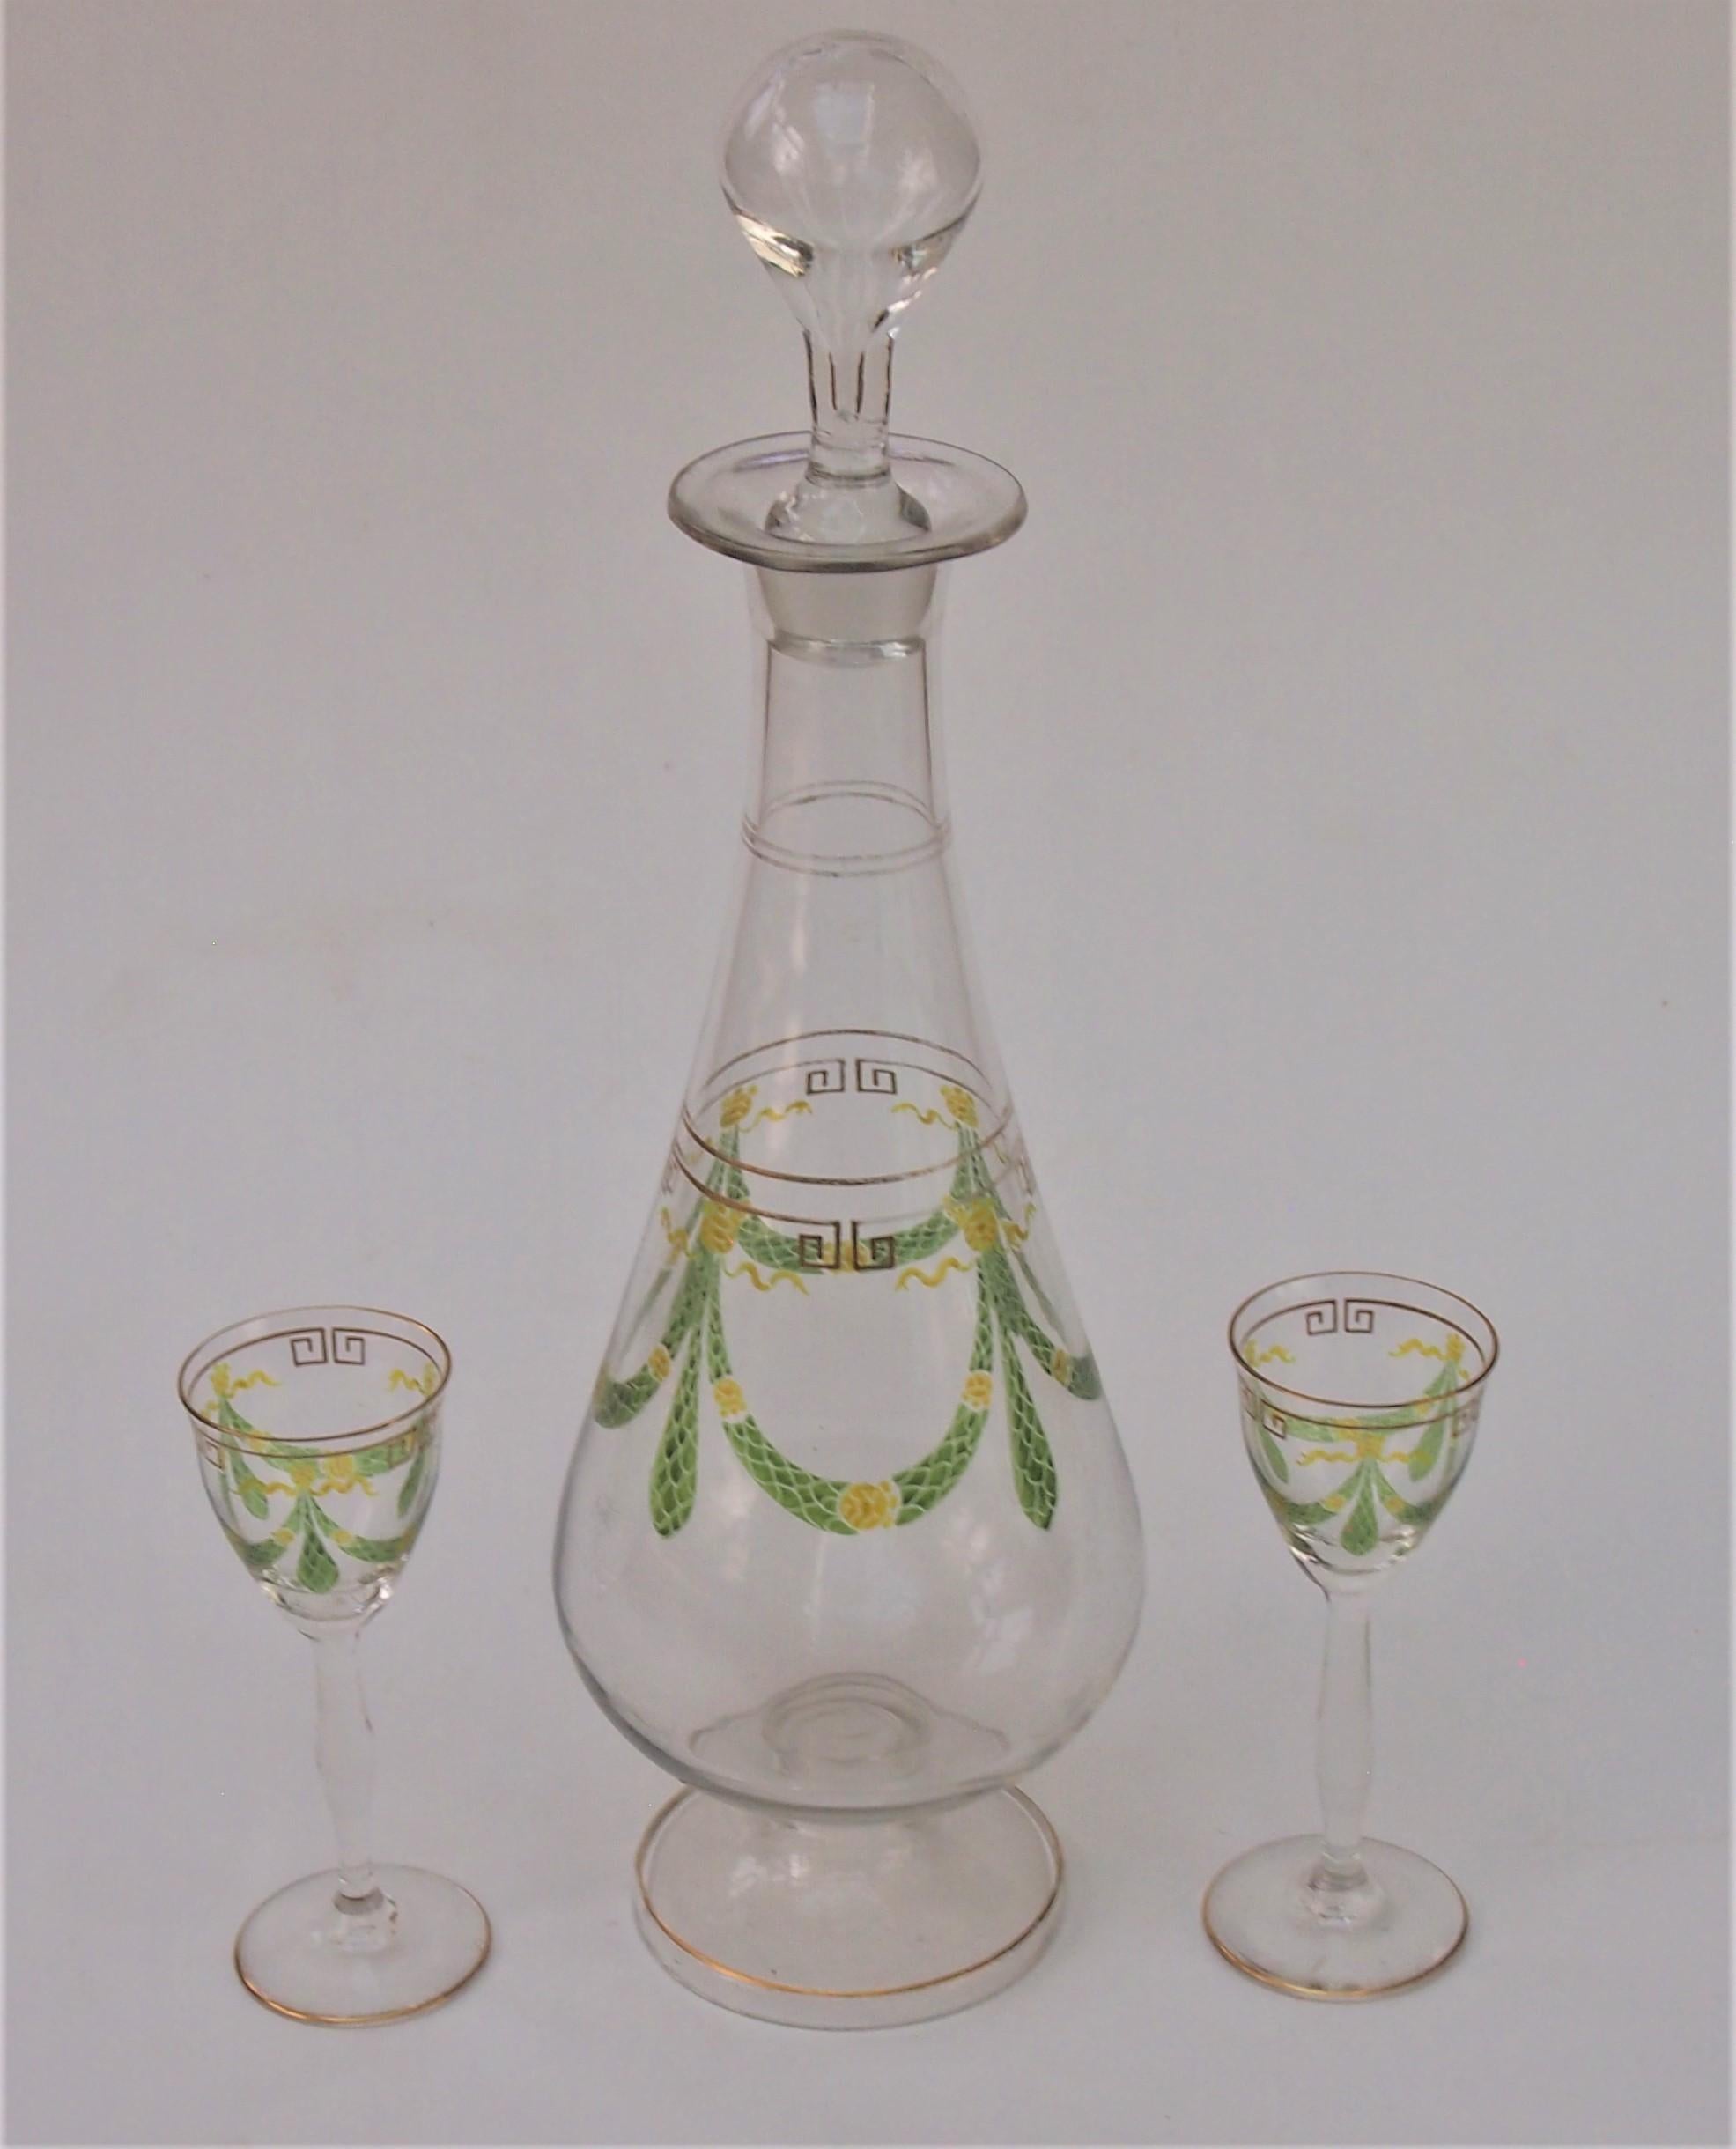 Super Theresienthal set -a large clear and enamel decanter and two small liqueur glasses, decorated in green and yellow translucent enamel swags and garlands in a classic Aesthetic Movement design. The glasses are 12 cms tall - the decanter is 33.5